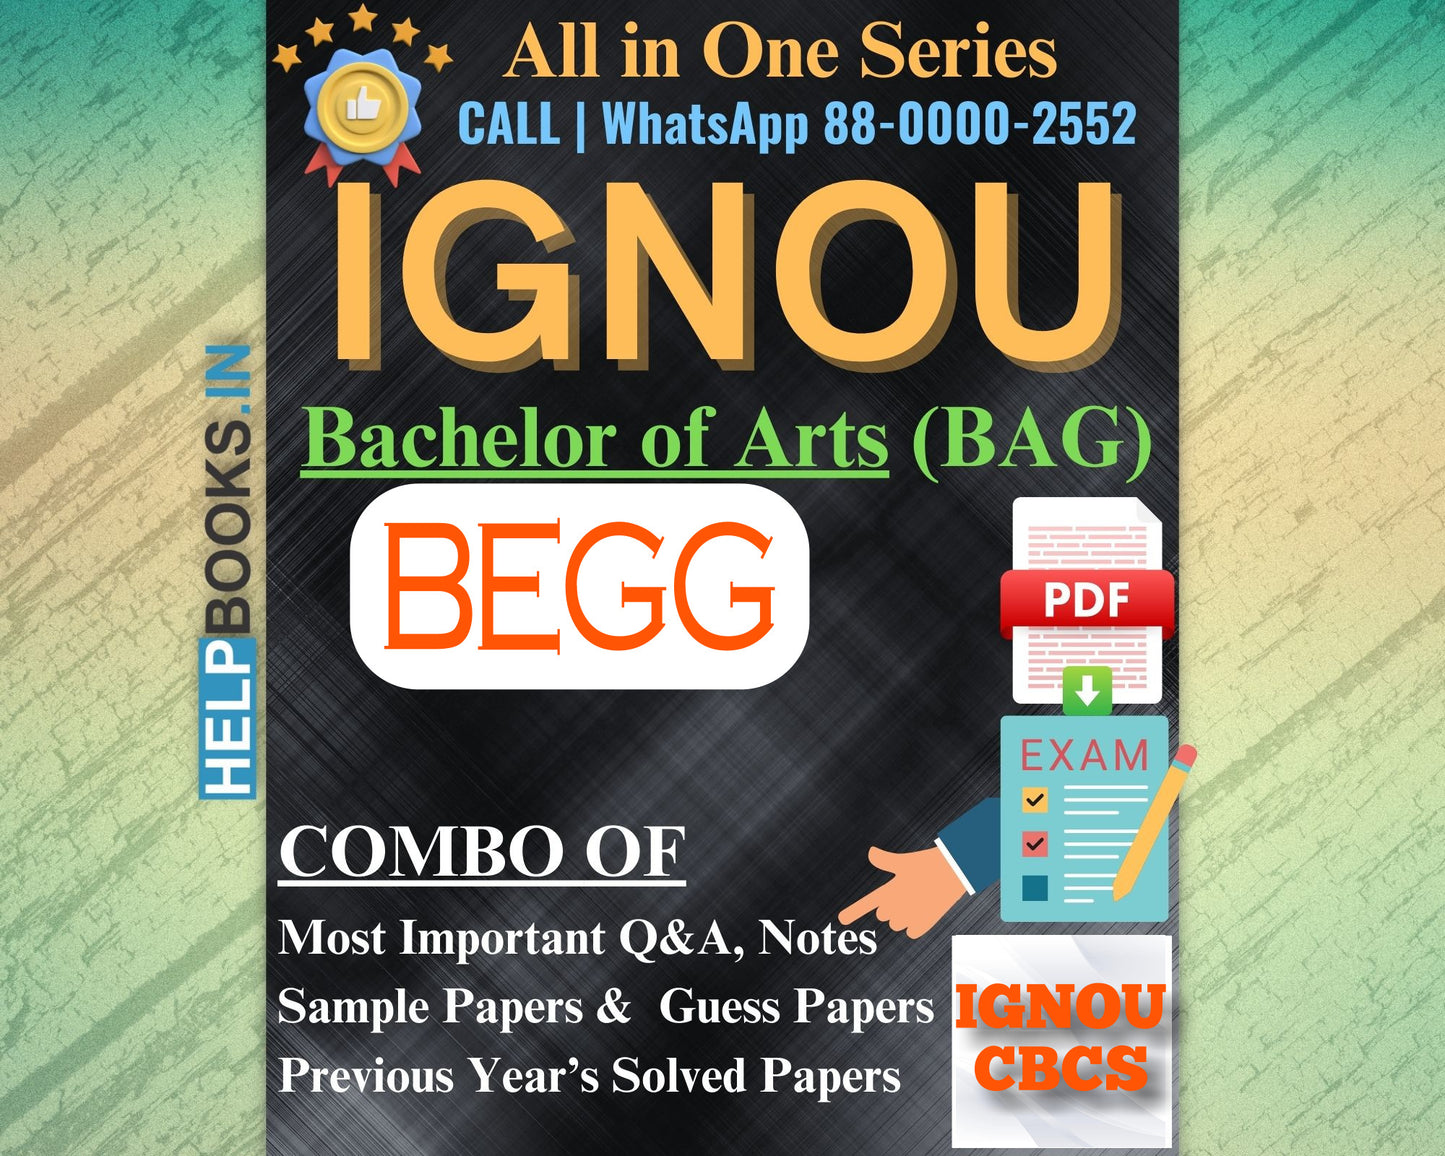 IGNOU BAG Online Study Package: Bachelor of Arts (BA) - Previous Year’s Solved Papers, Q&A, Exam Notes, Sample Papers, Guess Papers-BEGG171, BEGG172, BEGG173, BEGG174